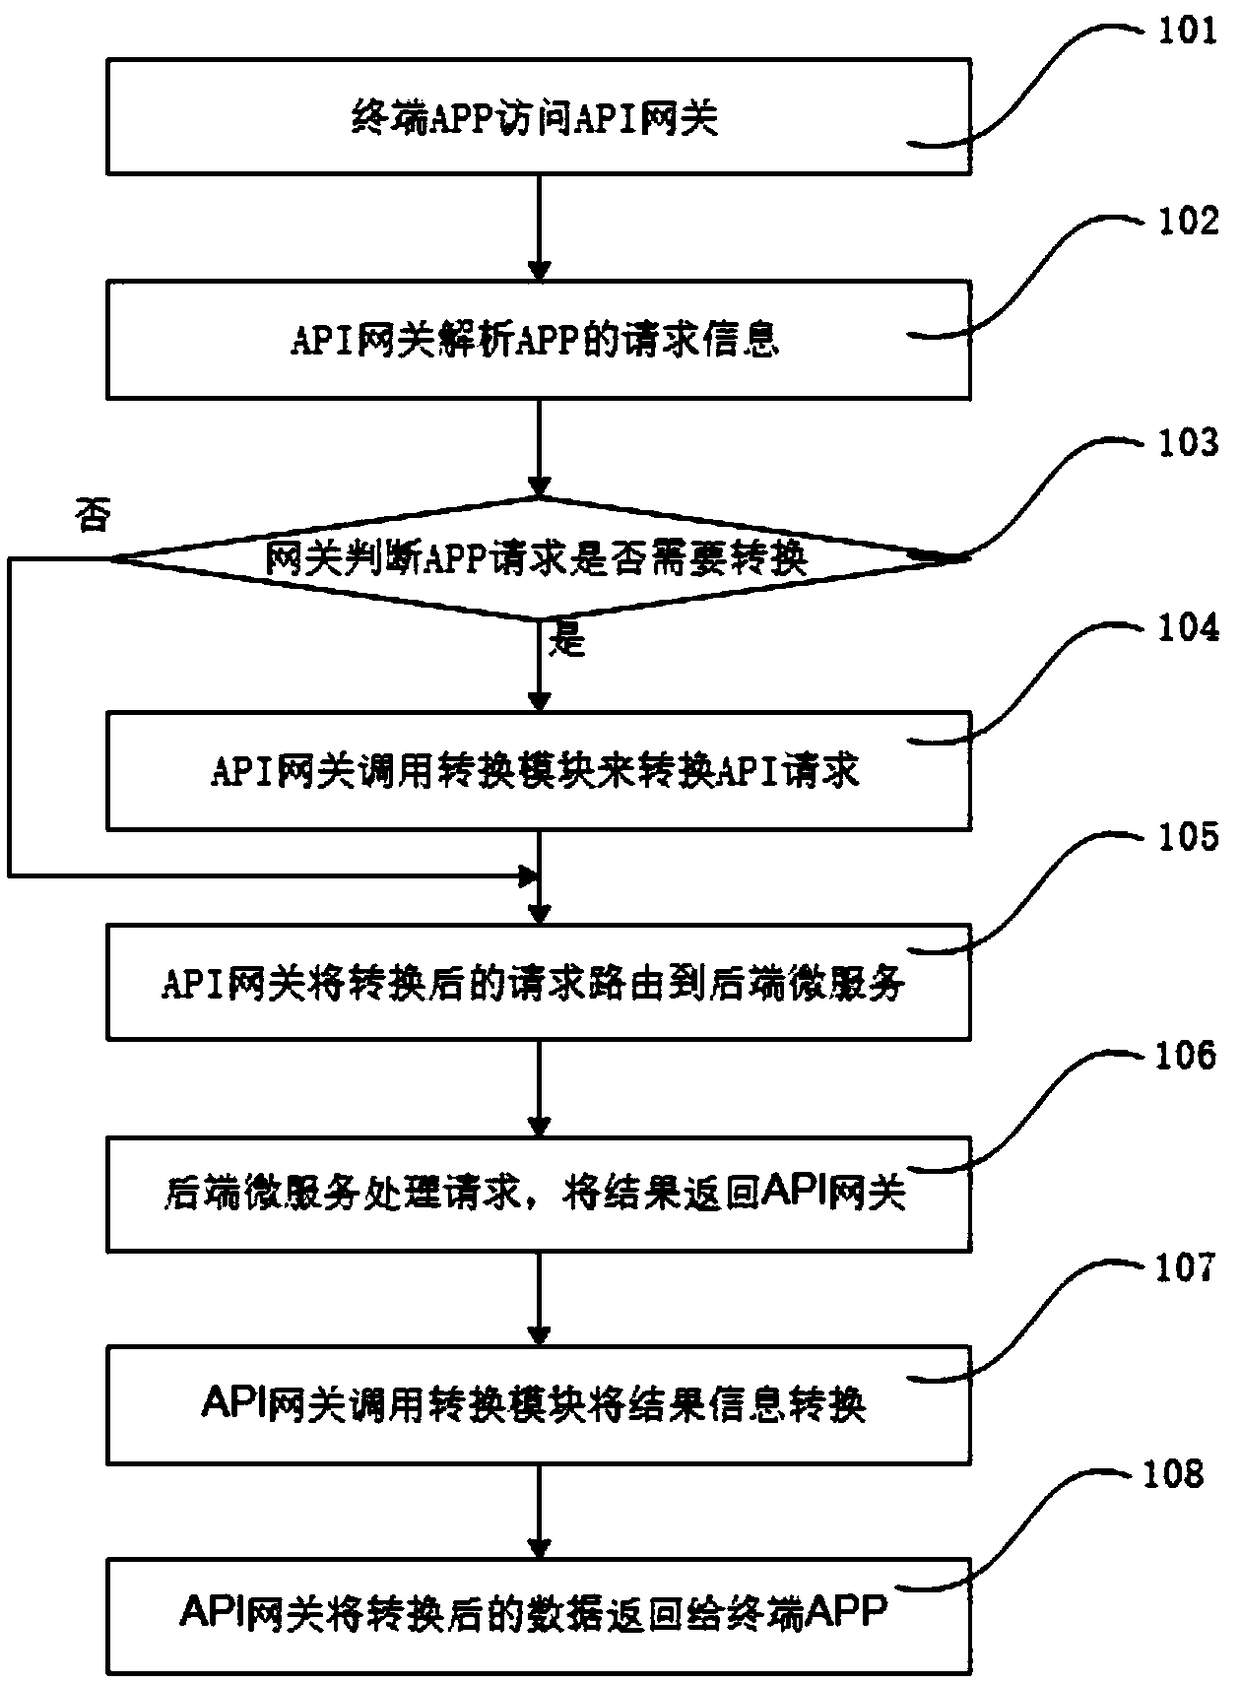 Method for implementing protocol conversion by API gateway